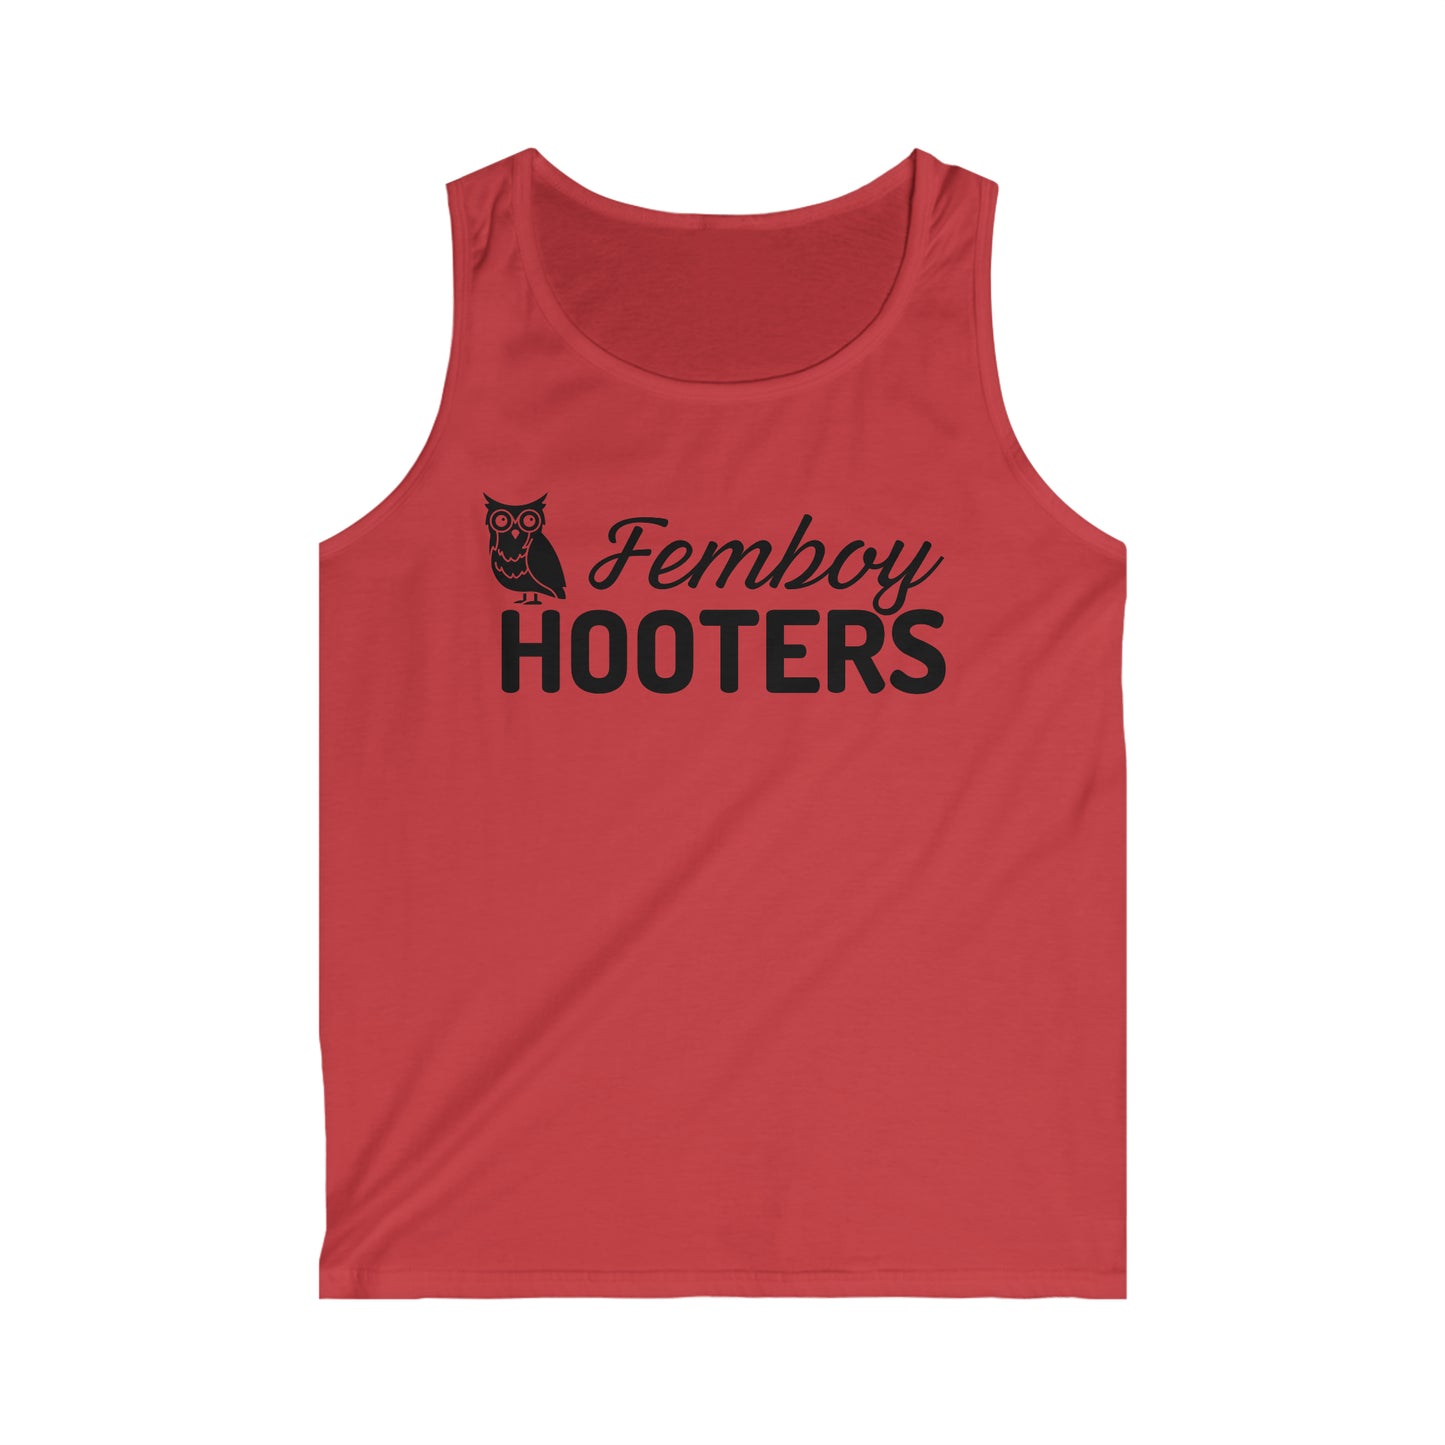 Femboy Hooters Men's Softstyle Tank Top